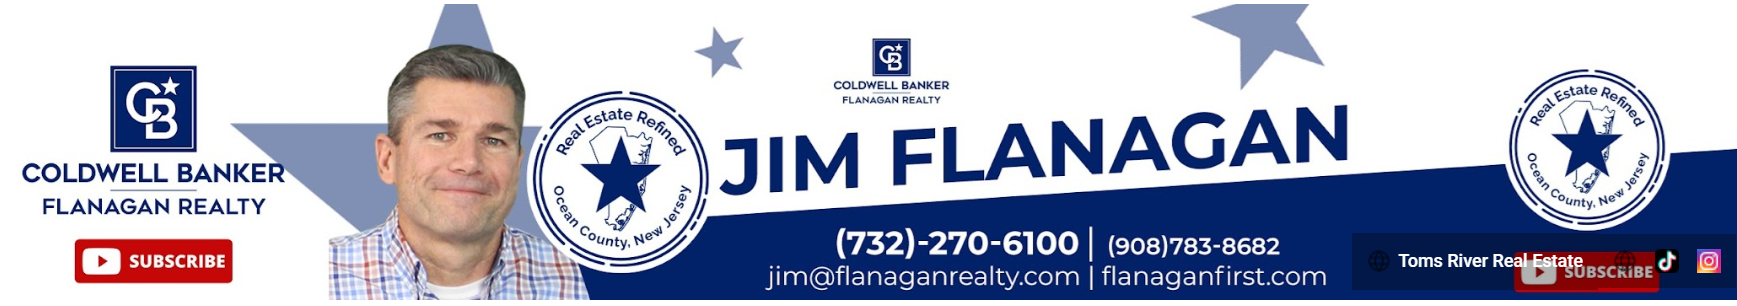 Coldwell-Banker-Flanagan-Realty-Youtube-channel